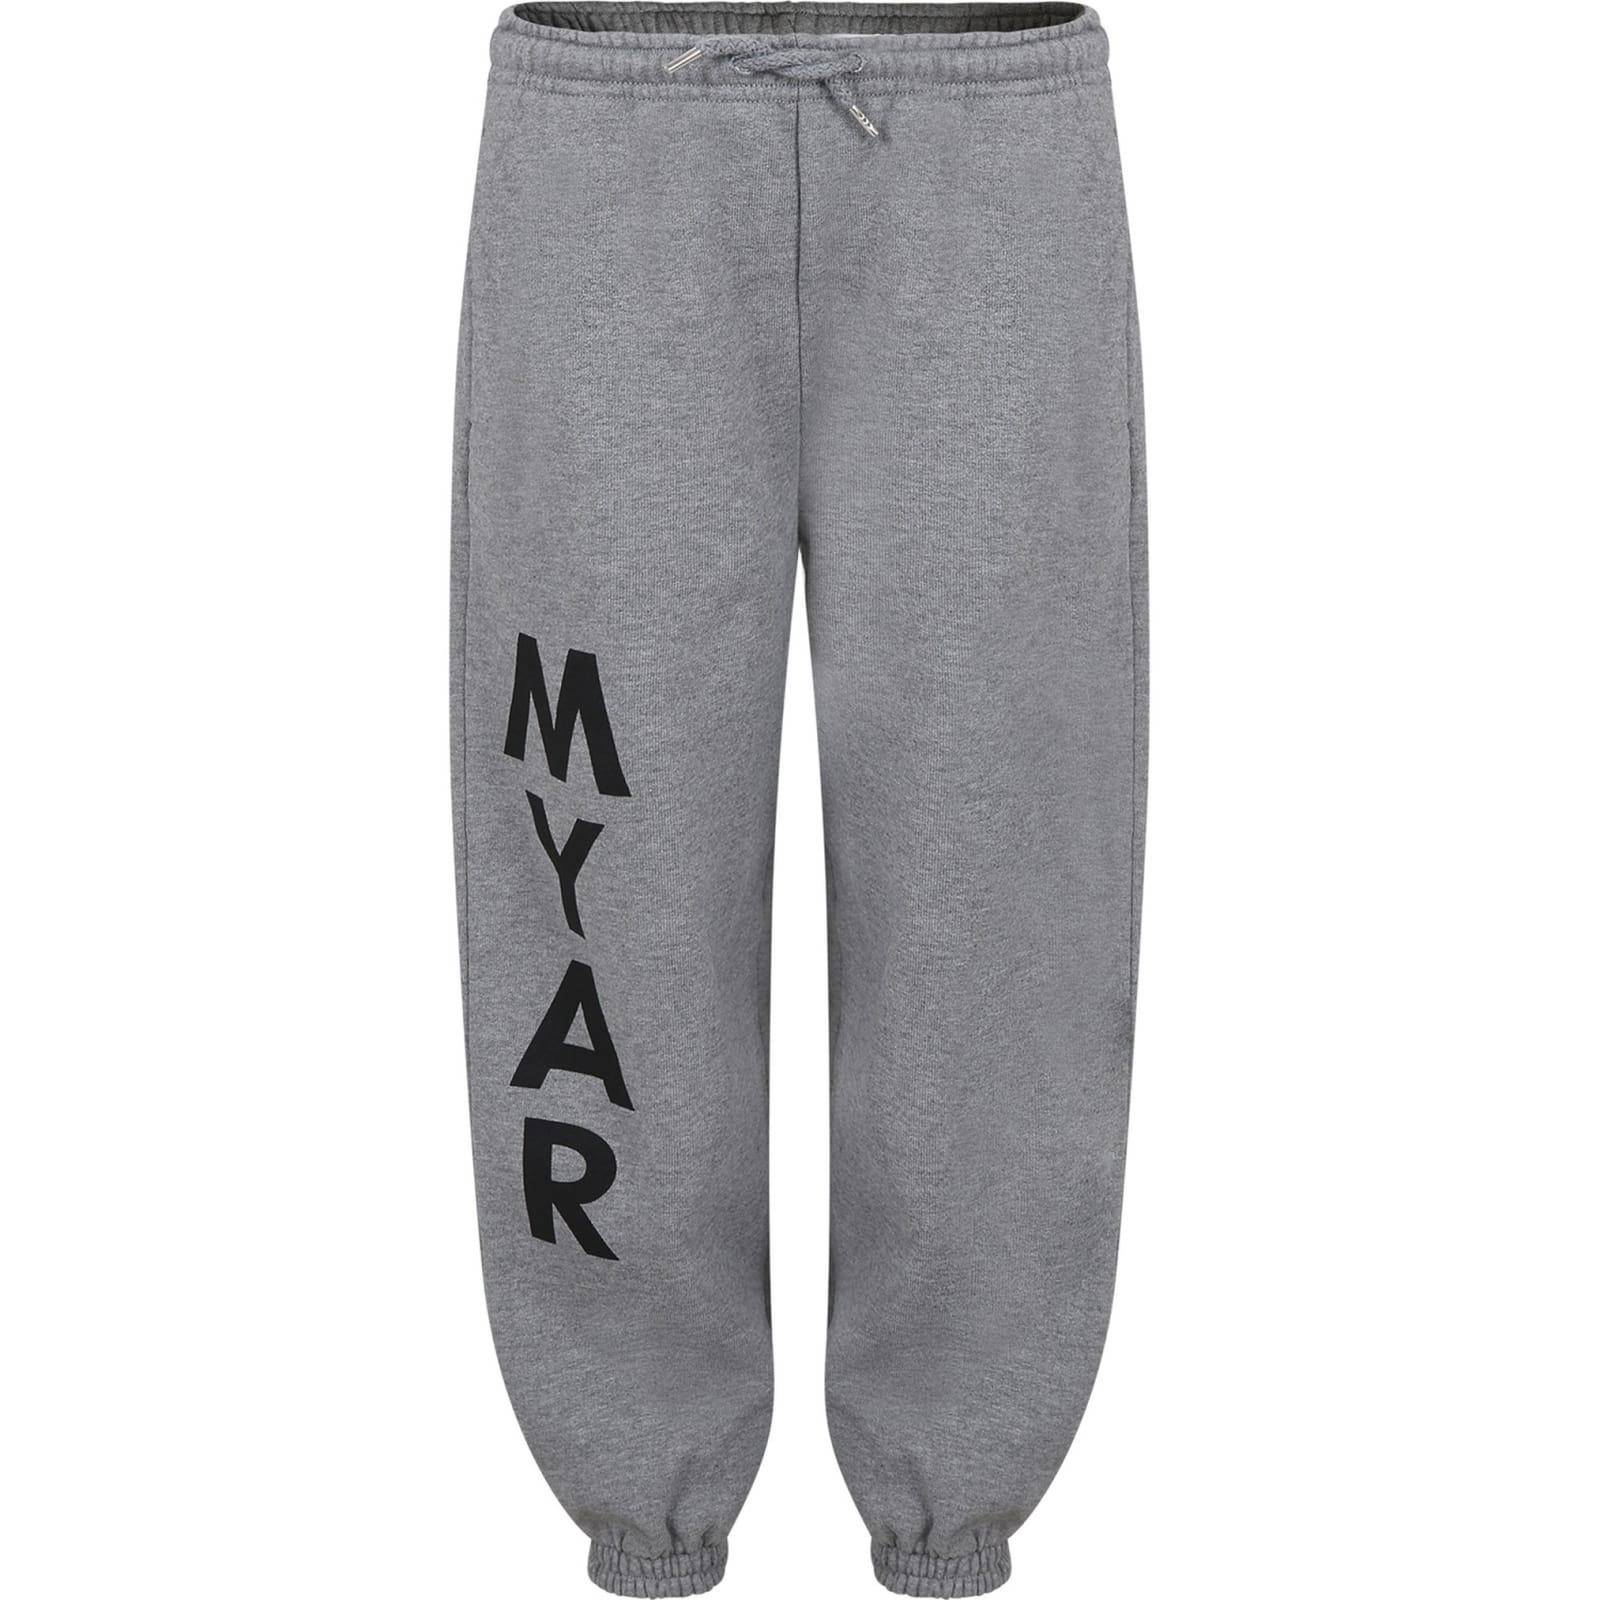 MYAR GREY TROUSERS FOR KIDS WITH LOGO